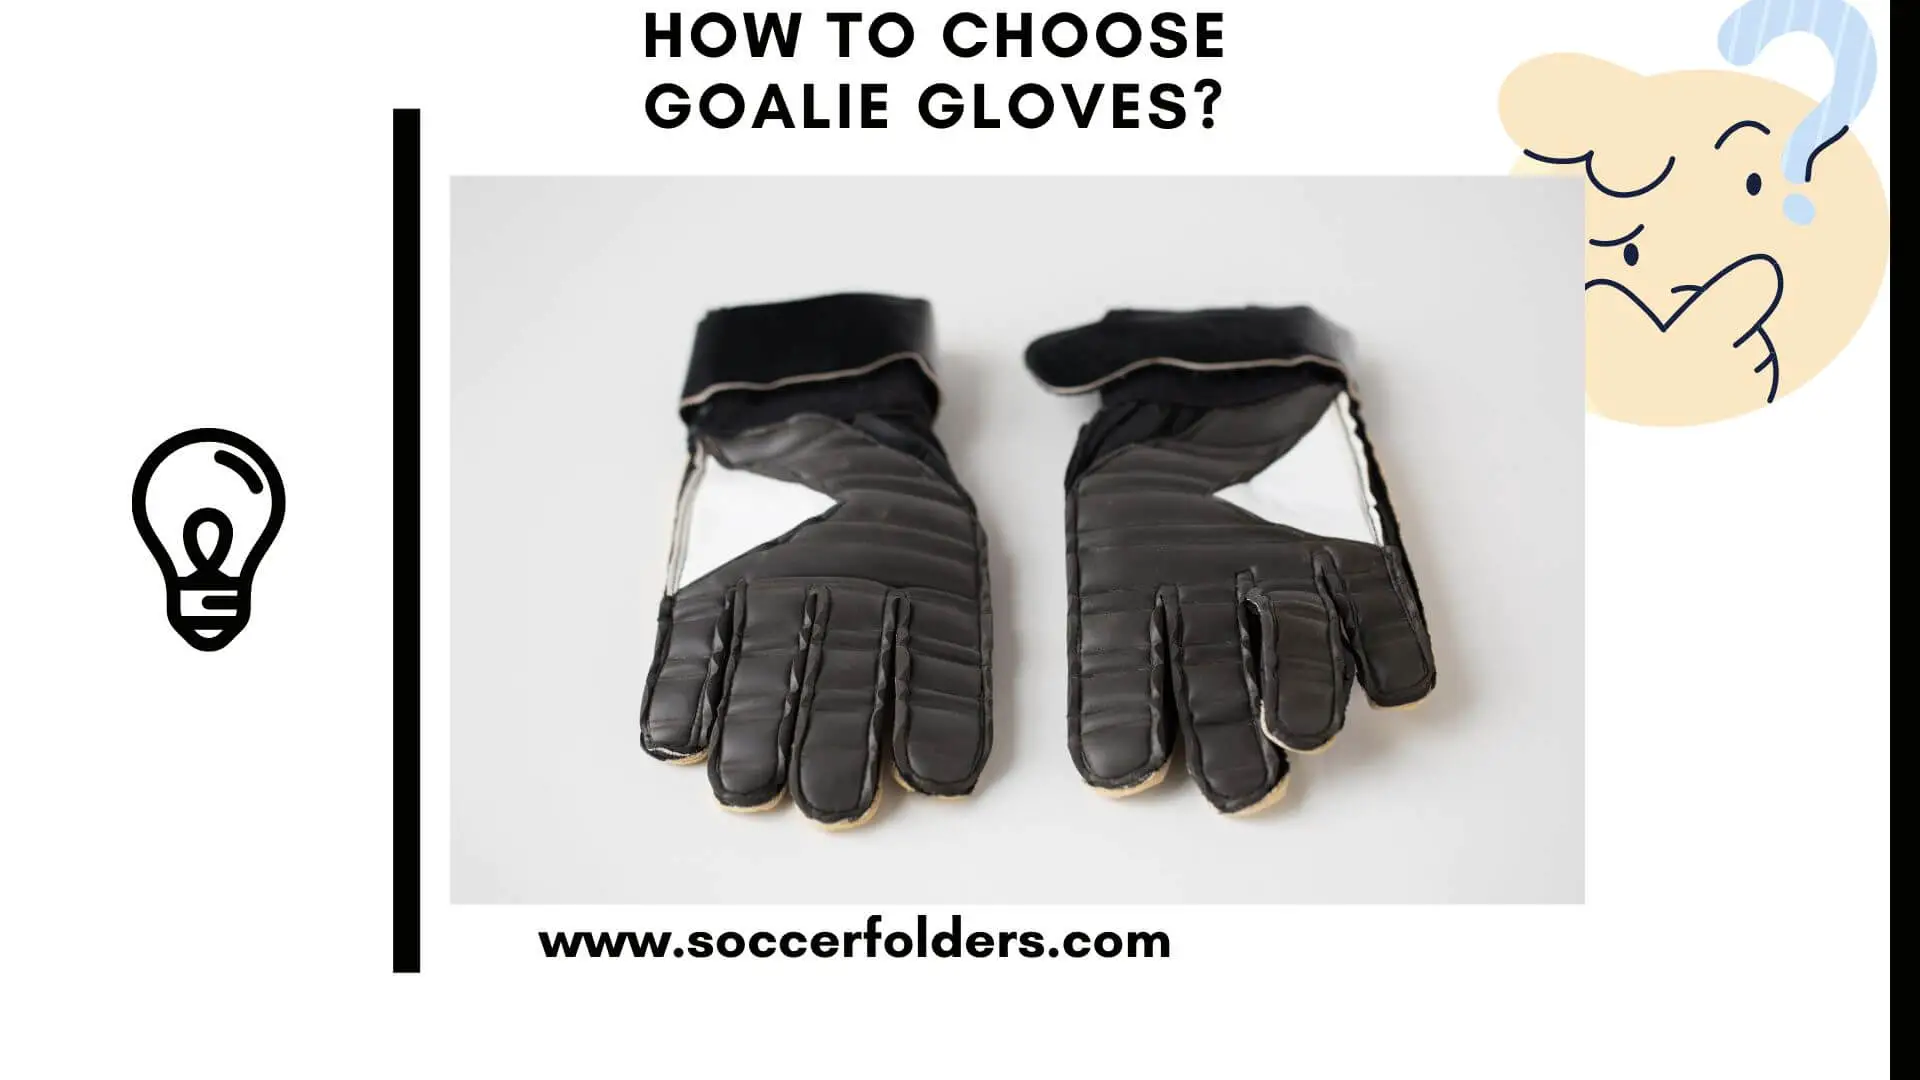 How to choose soccer goalkeeper gloves - Featured Image